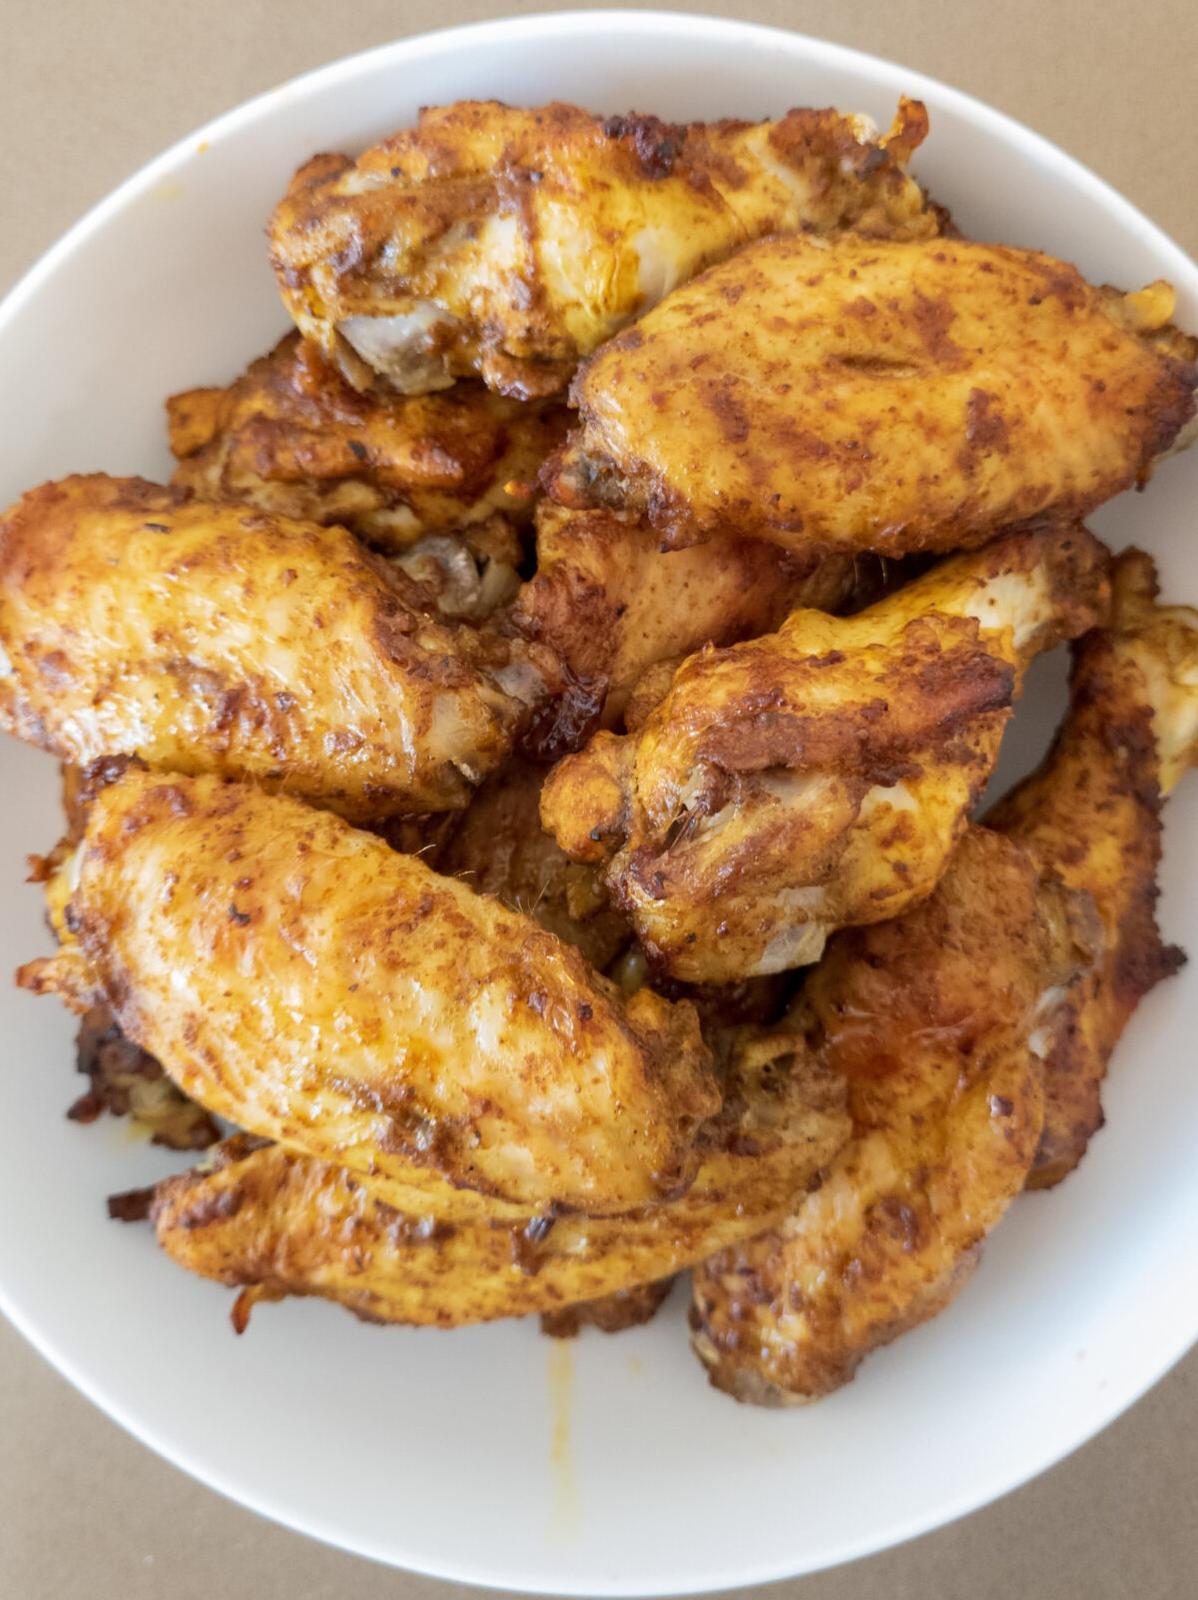  These wings are marinated in a blend of spices that will make your mouth water!